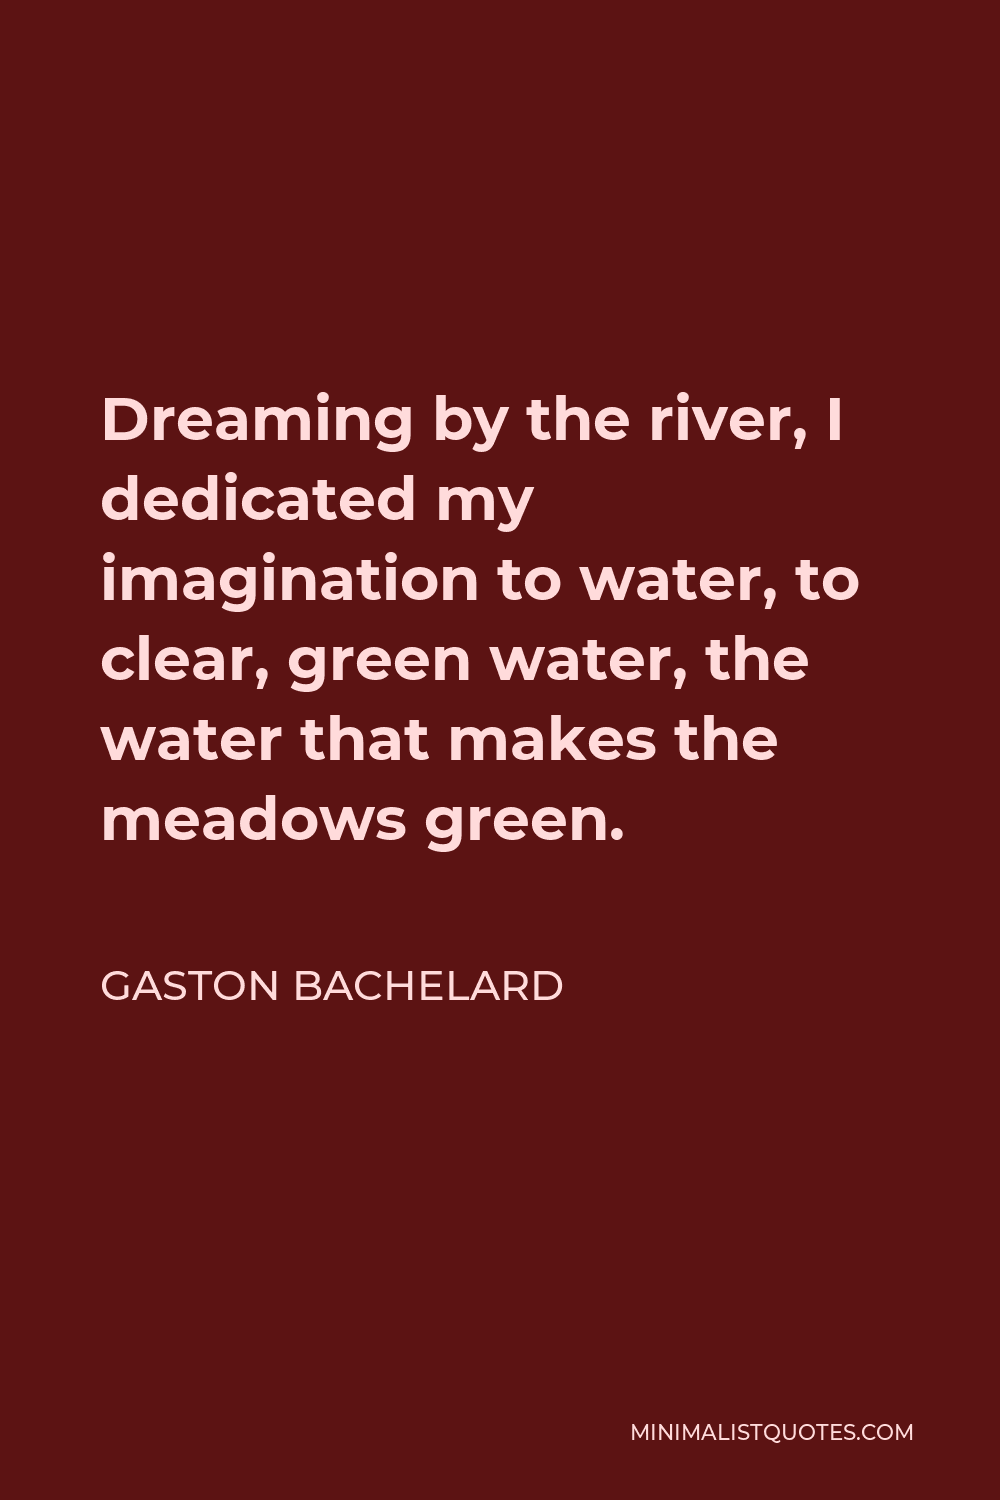 Gaston Bachelard Quote - Dreaming by the river, I dedicated my imagination to water, to clear, green water, the water that makes the meadows green.